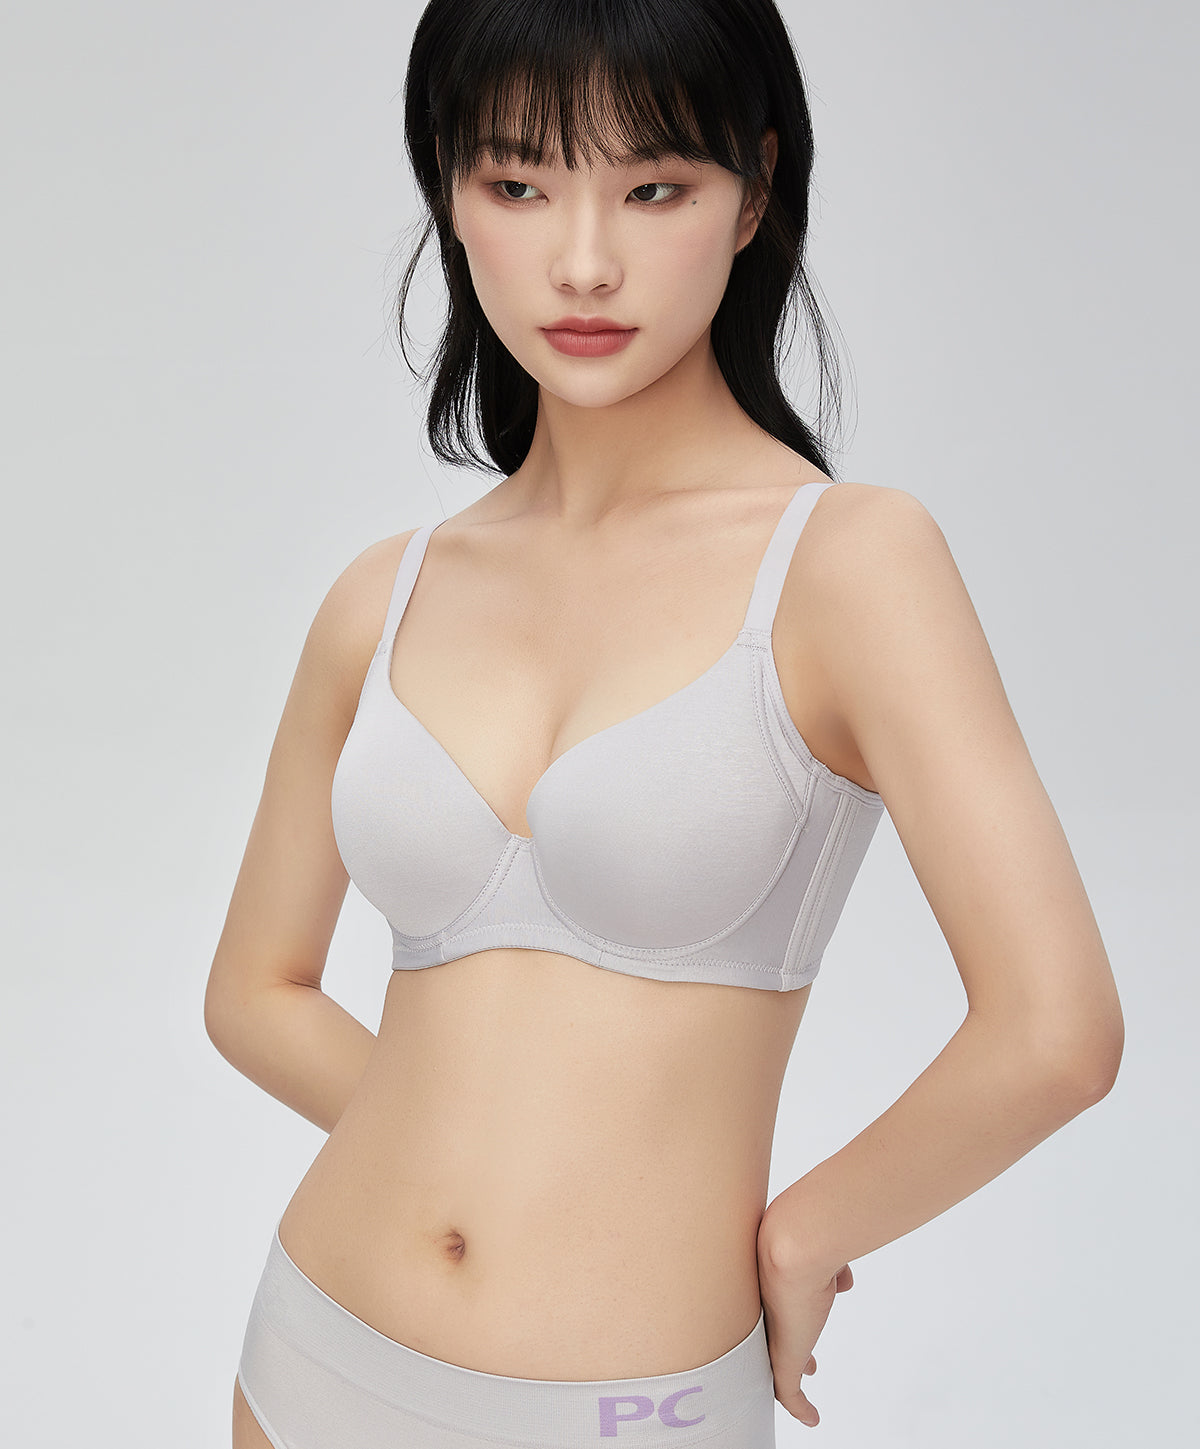 Pierre Cardin Lingerie Malaysia - Our push up bra lift you up securely with  or without strap and won't slip down. Complete your off shoulder tops or  dresses with strapless bra today.